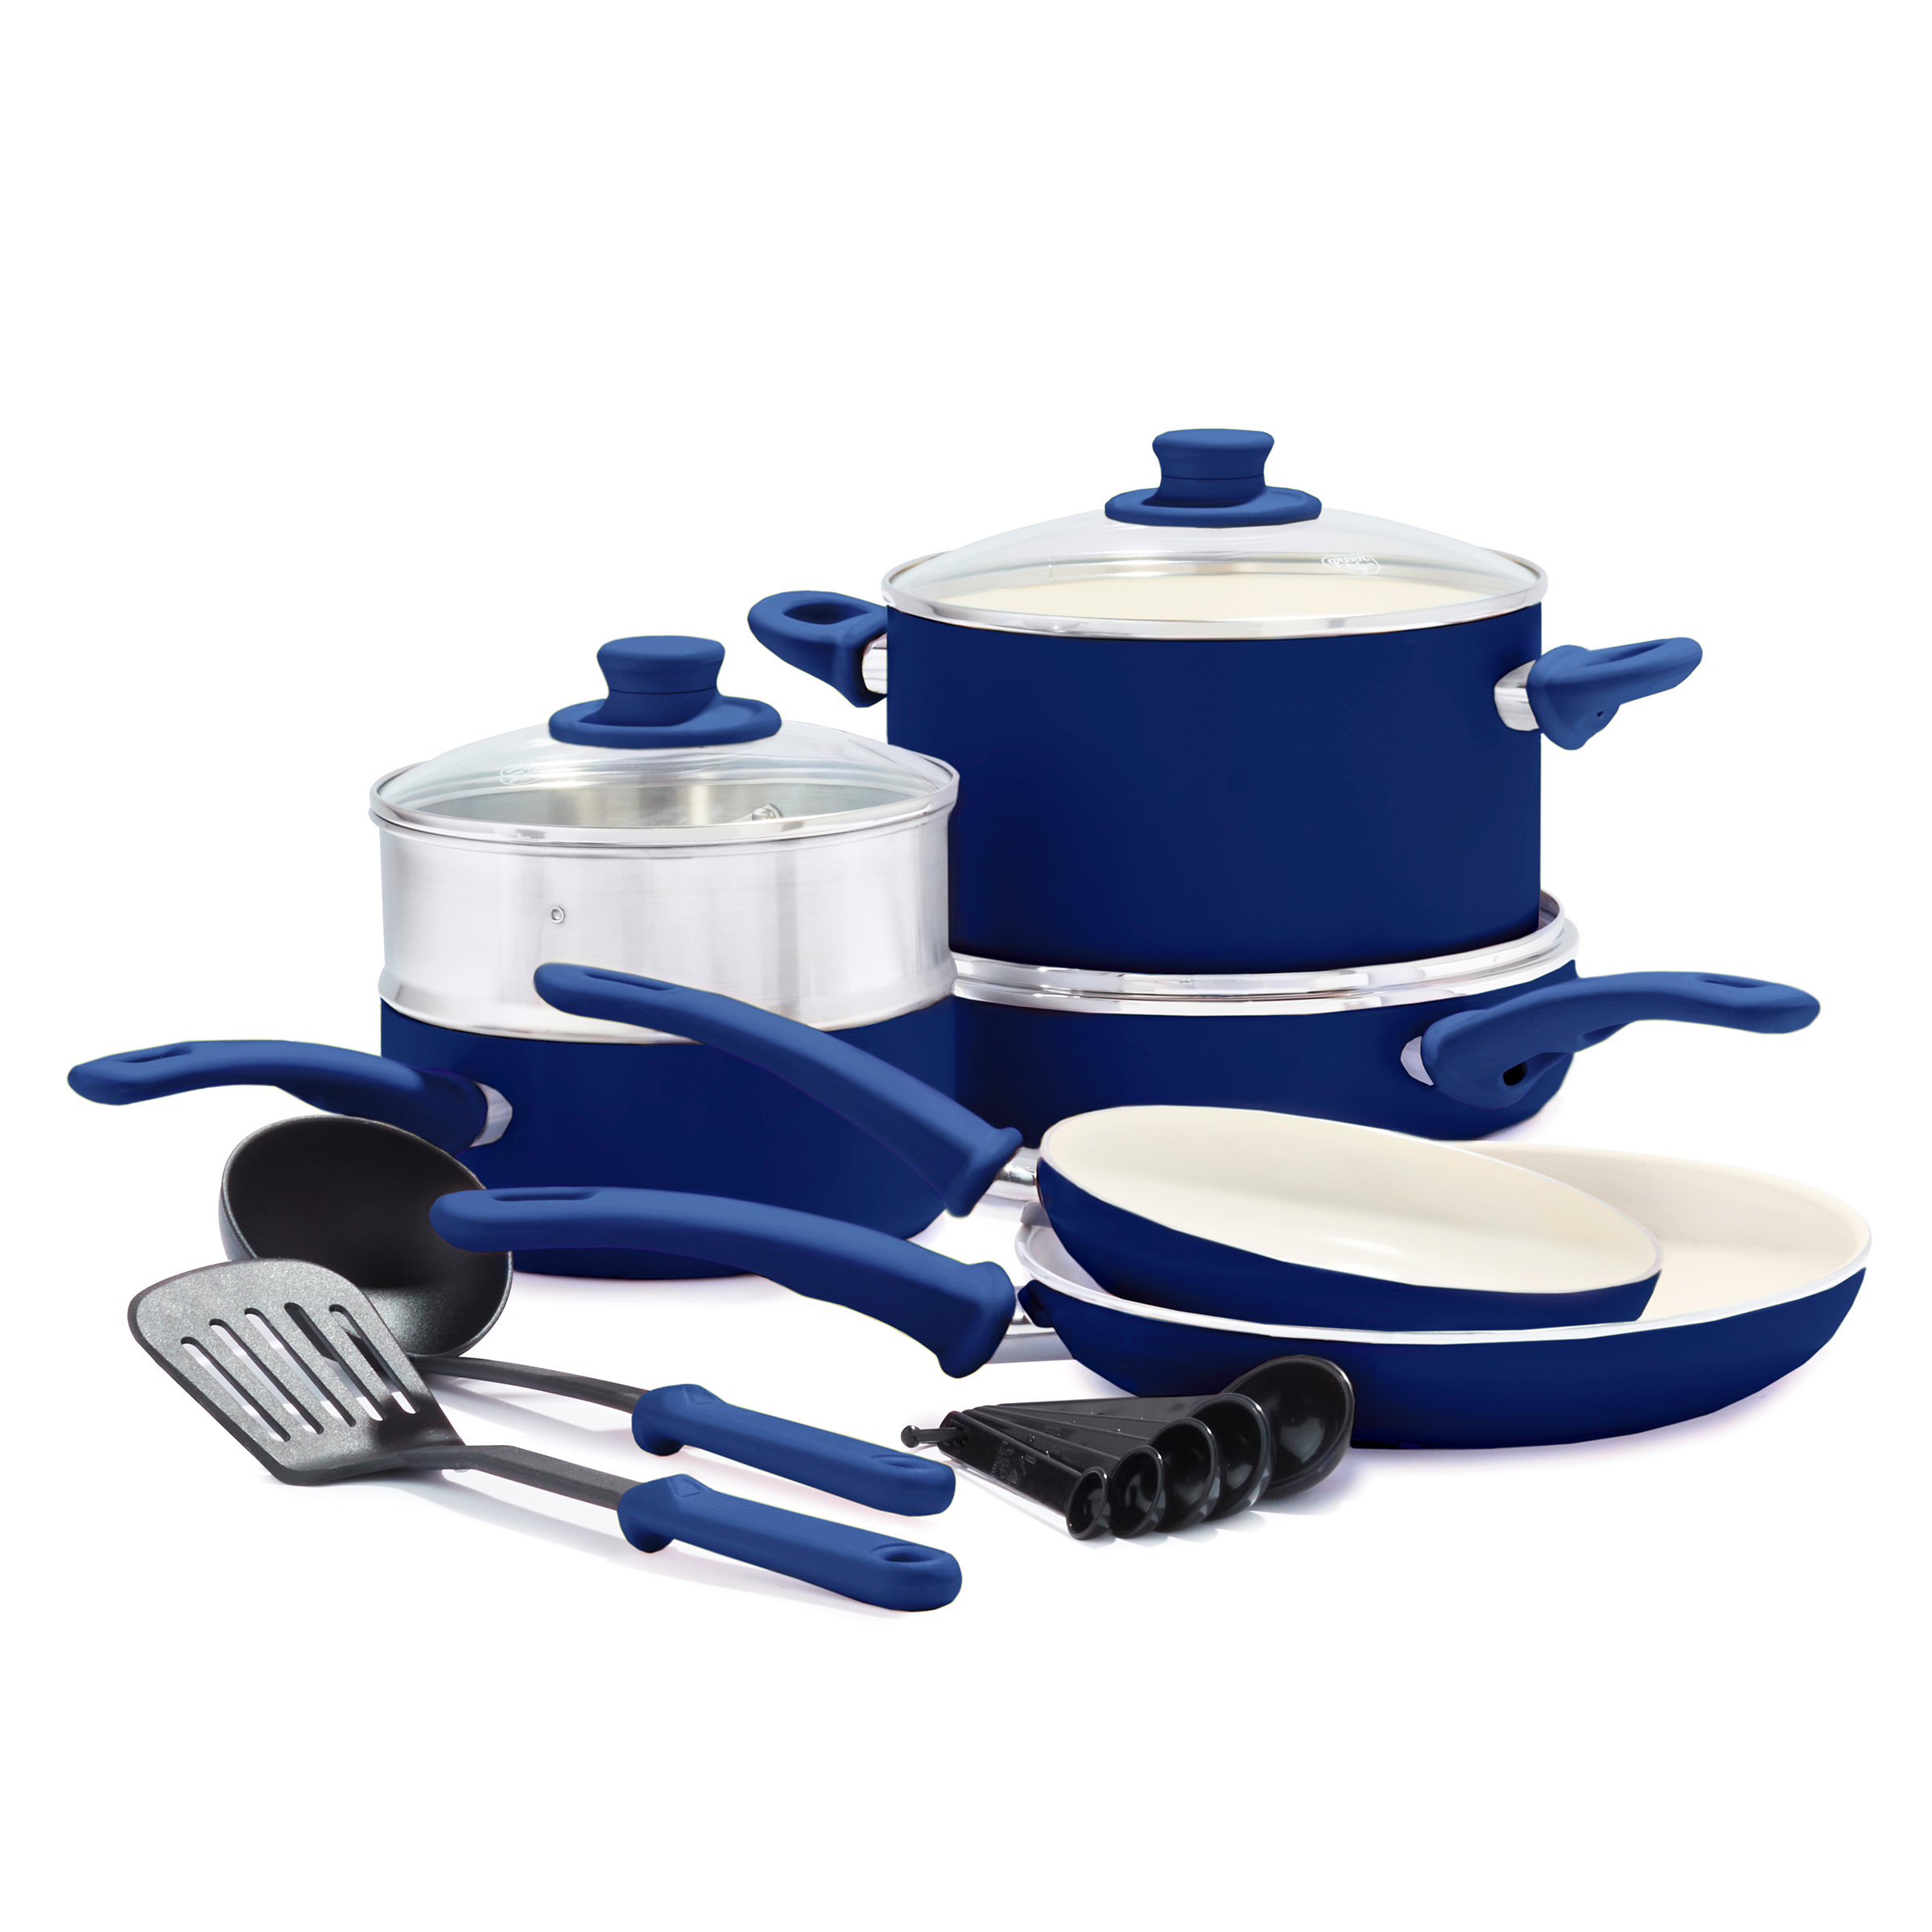 GreenLife 18-Piece Soft Grip Toxin-Free Healthy Ceramic Non-Stick Cookware  Set, Turquoise, Dishwasher Safe 